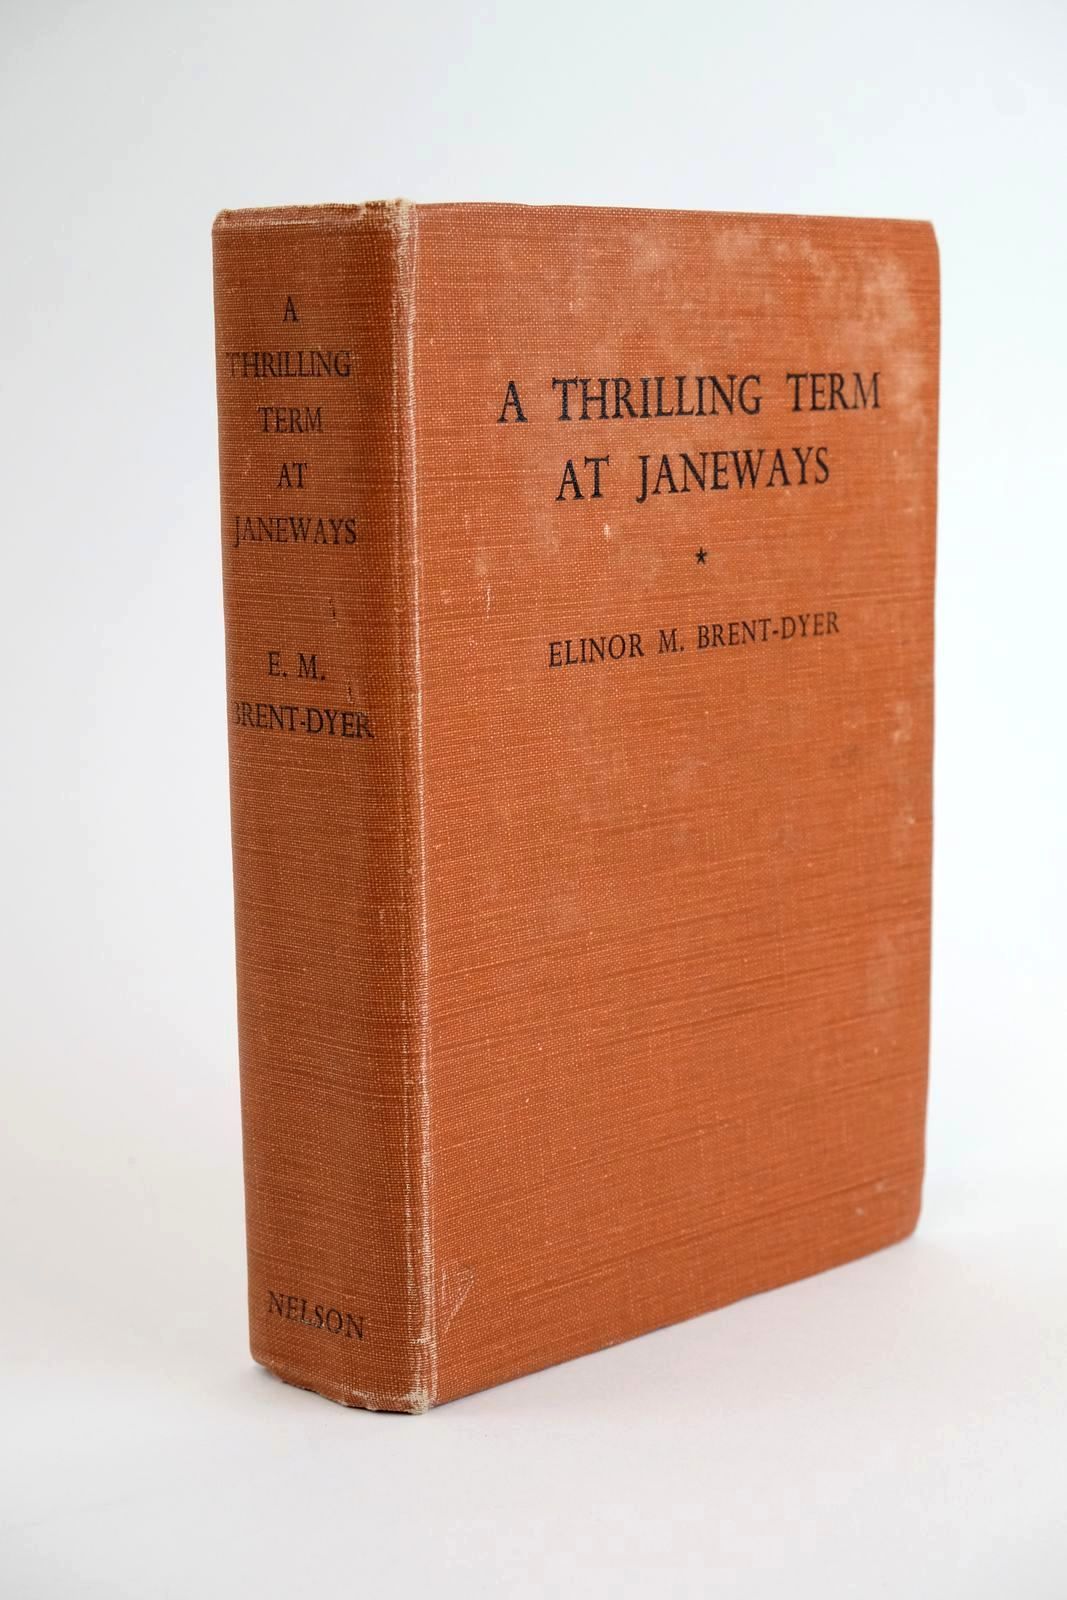 Photo of A THRILLING TERM AT JANEWAYS' written by Brent-Dyer, Elinor M. illustrated by Anderson, Florence Mary published by Thomas Nelson and Sons Ltd. (STOCK CODE: 1323299)  for sale by Stella & Rose's Books